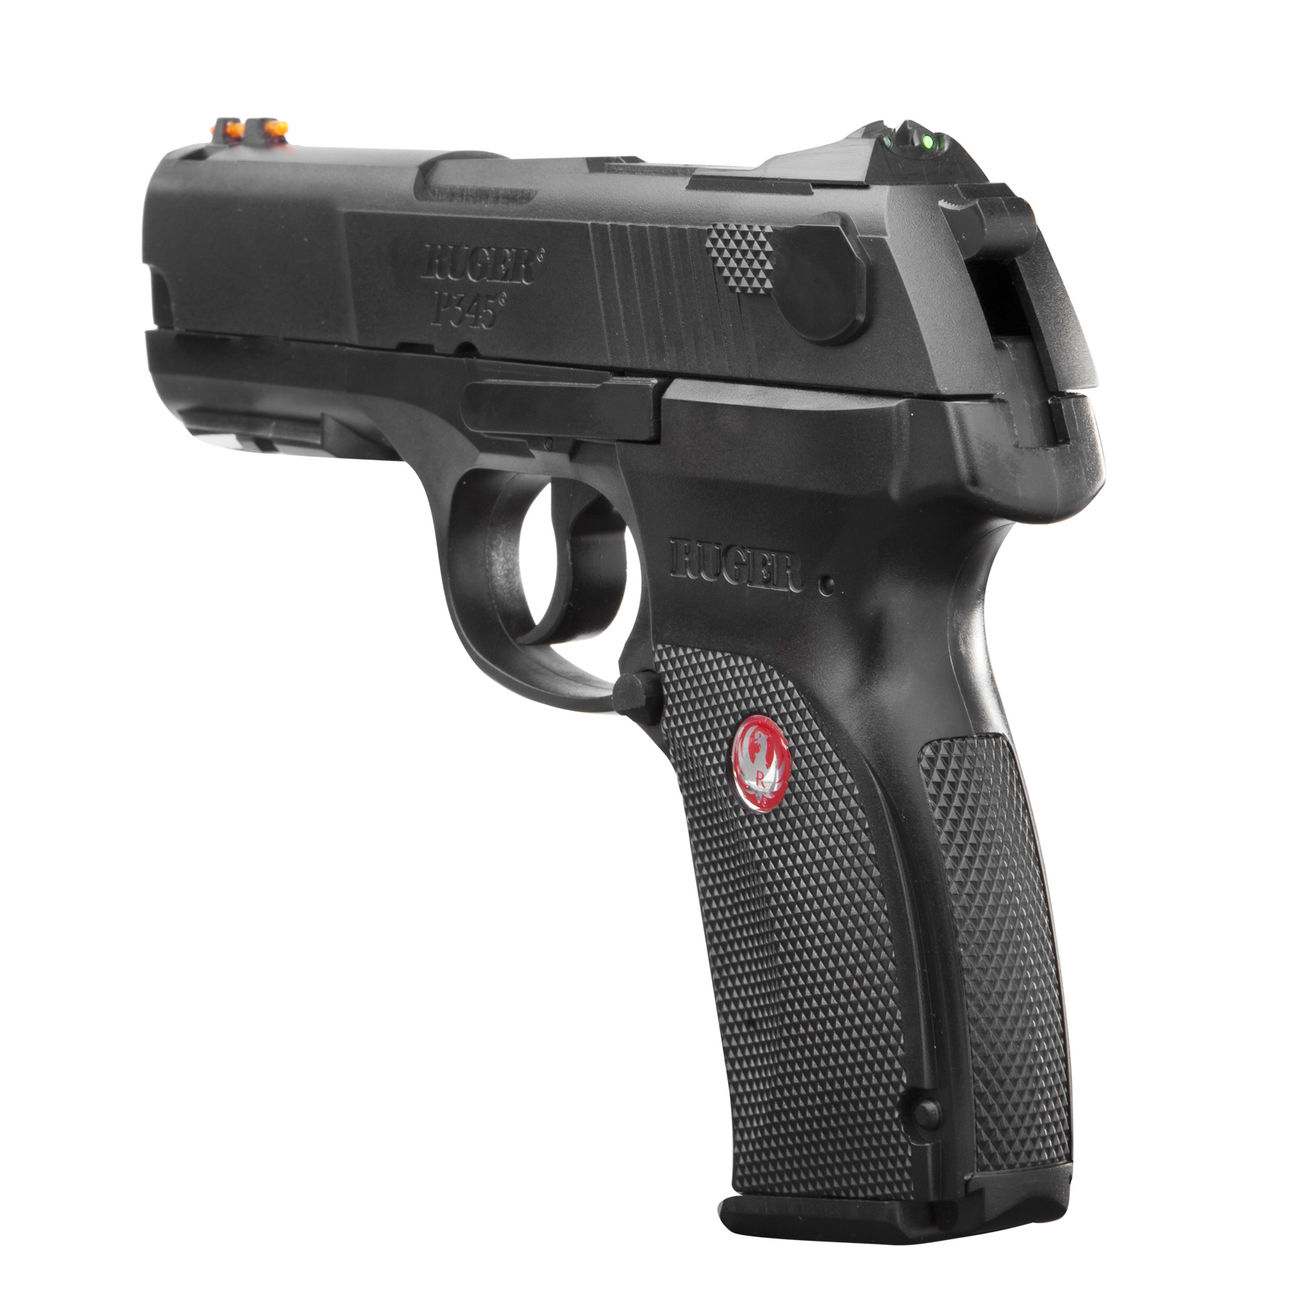 Pistola Airsoft Ruger P345 CO2 Bbs 6mm – XtremeChiwas